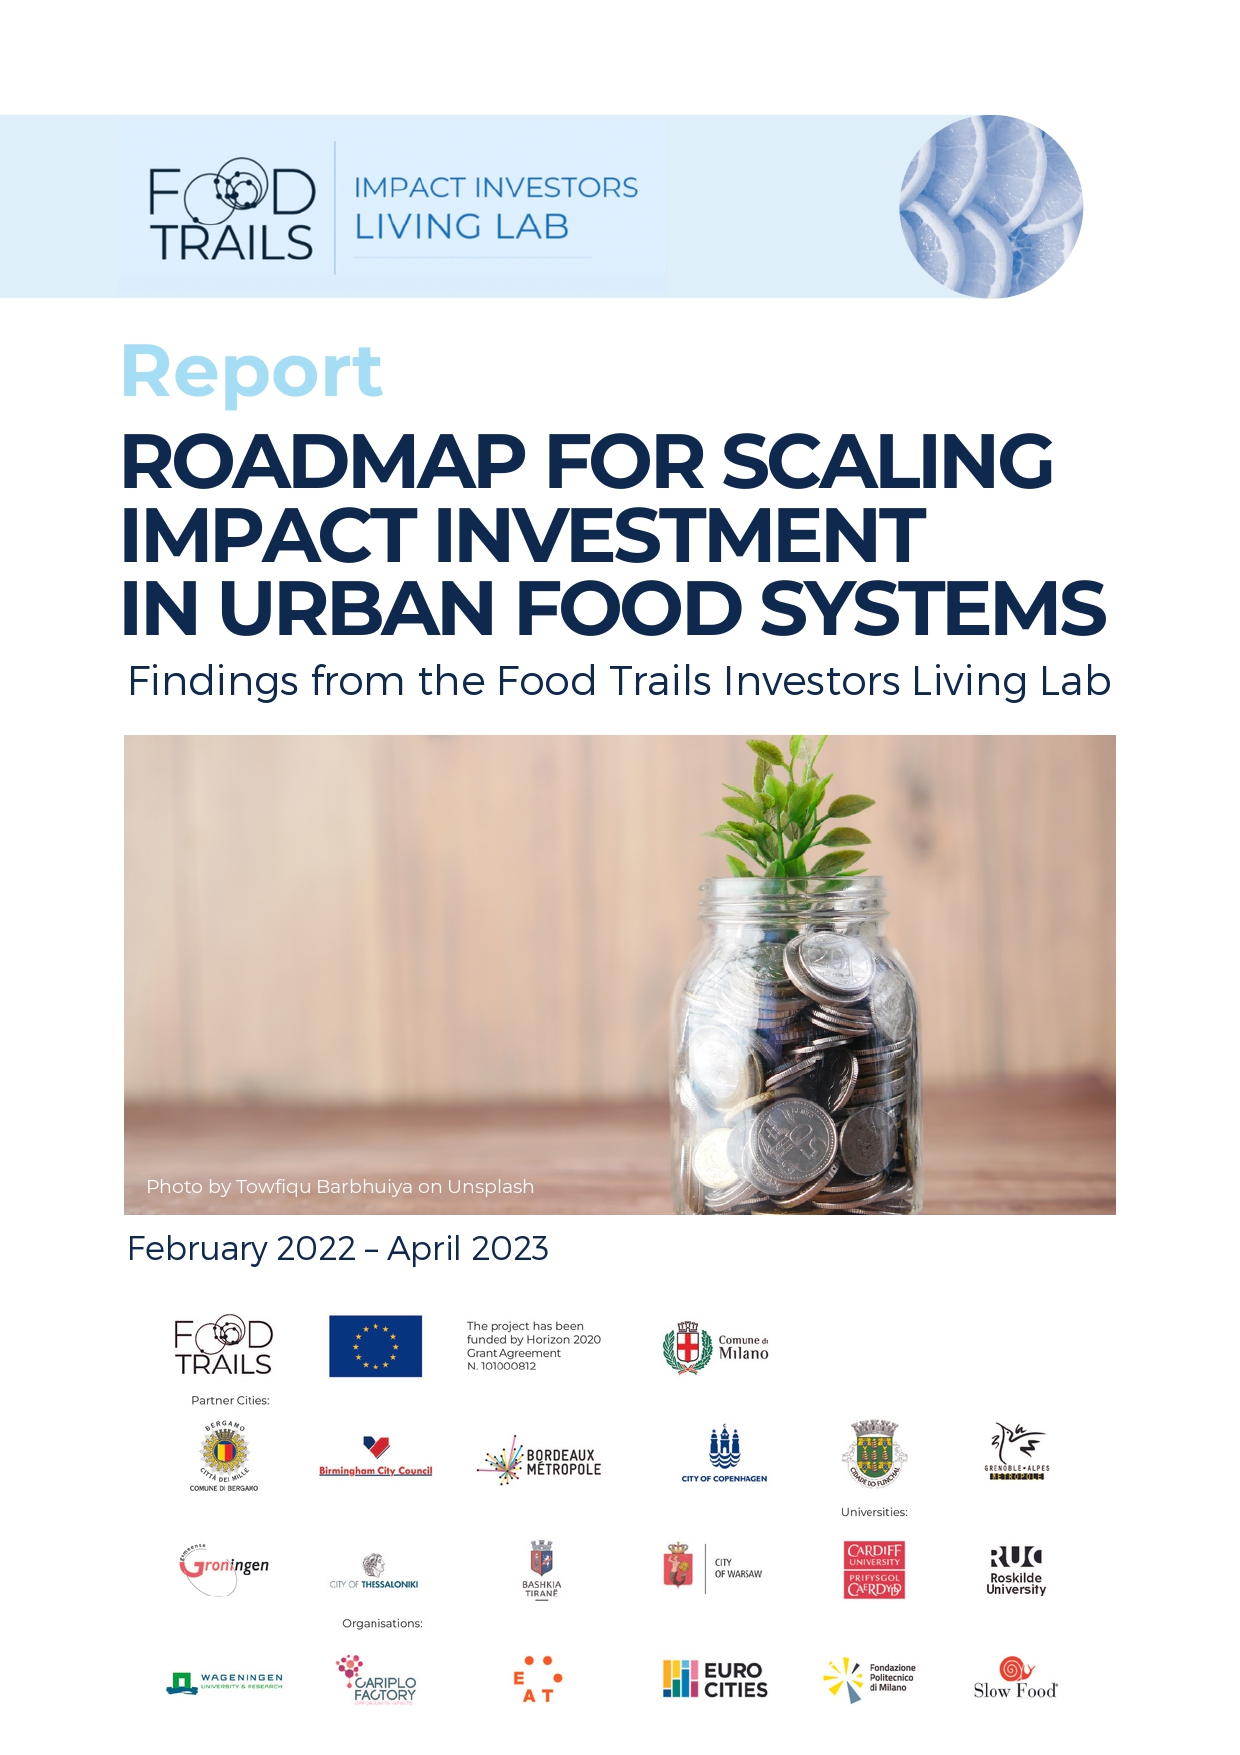 Impact Investors Living Lab – Overview and Roadmap for Scaling Impact Investment in Urban Food Systems